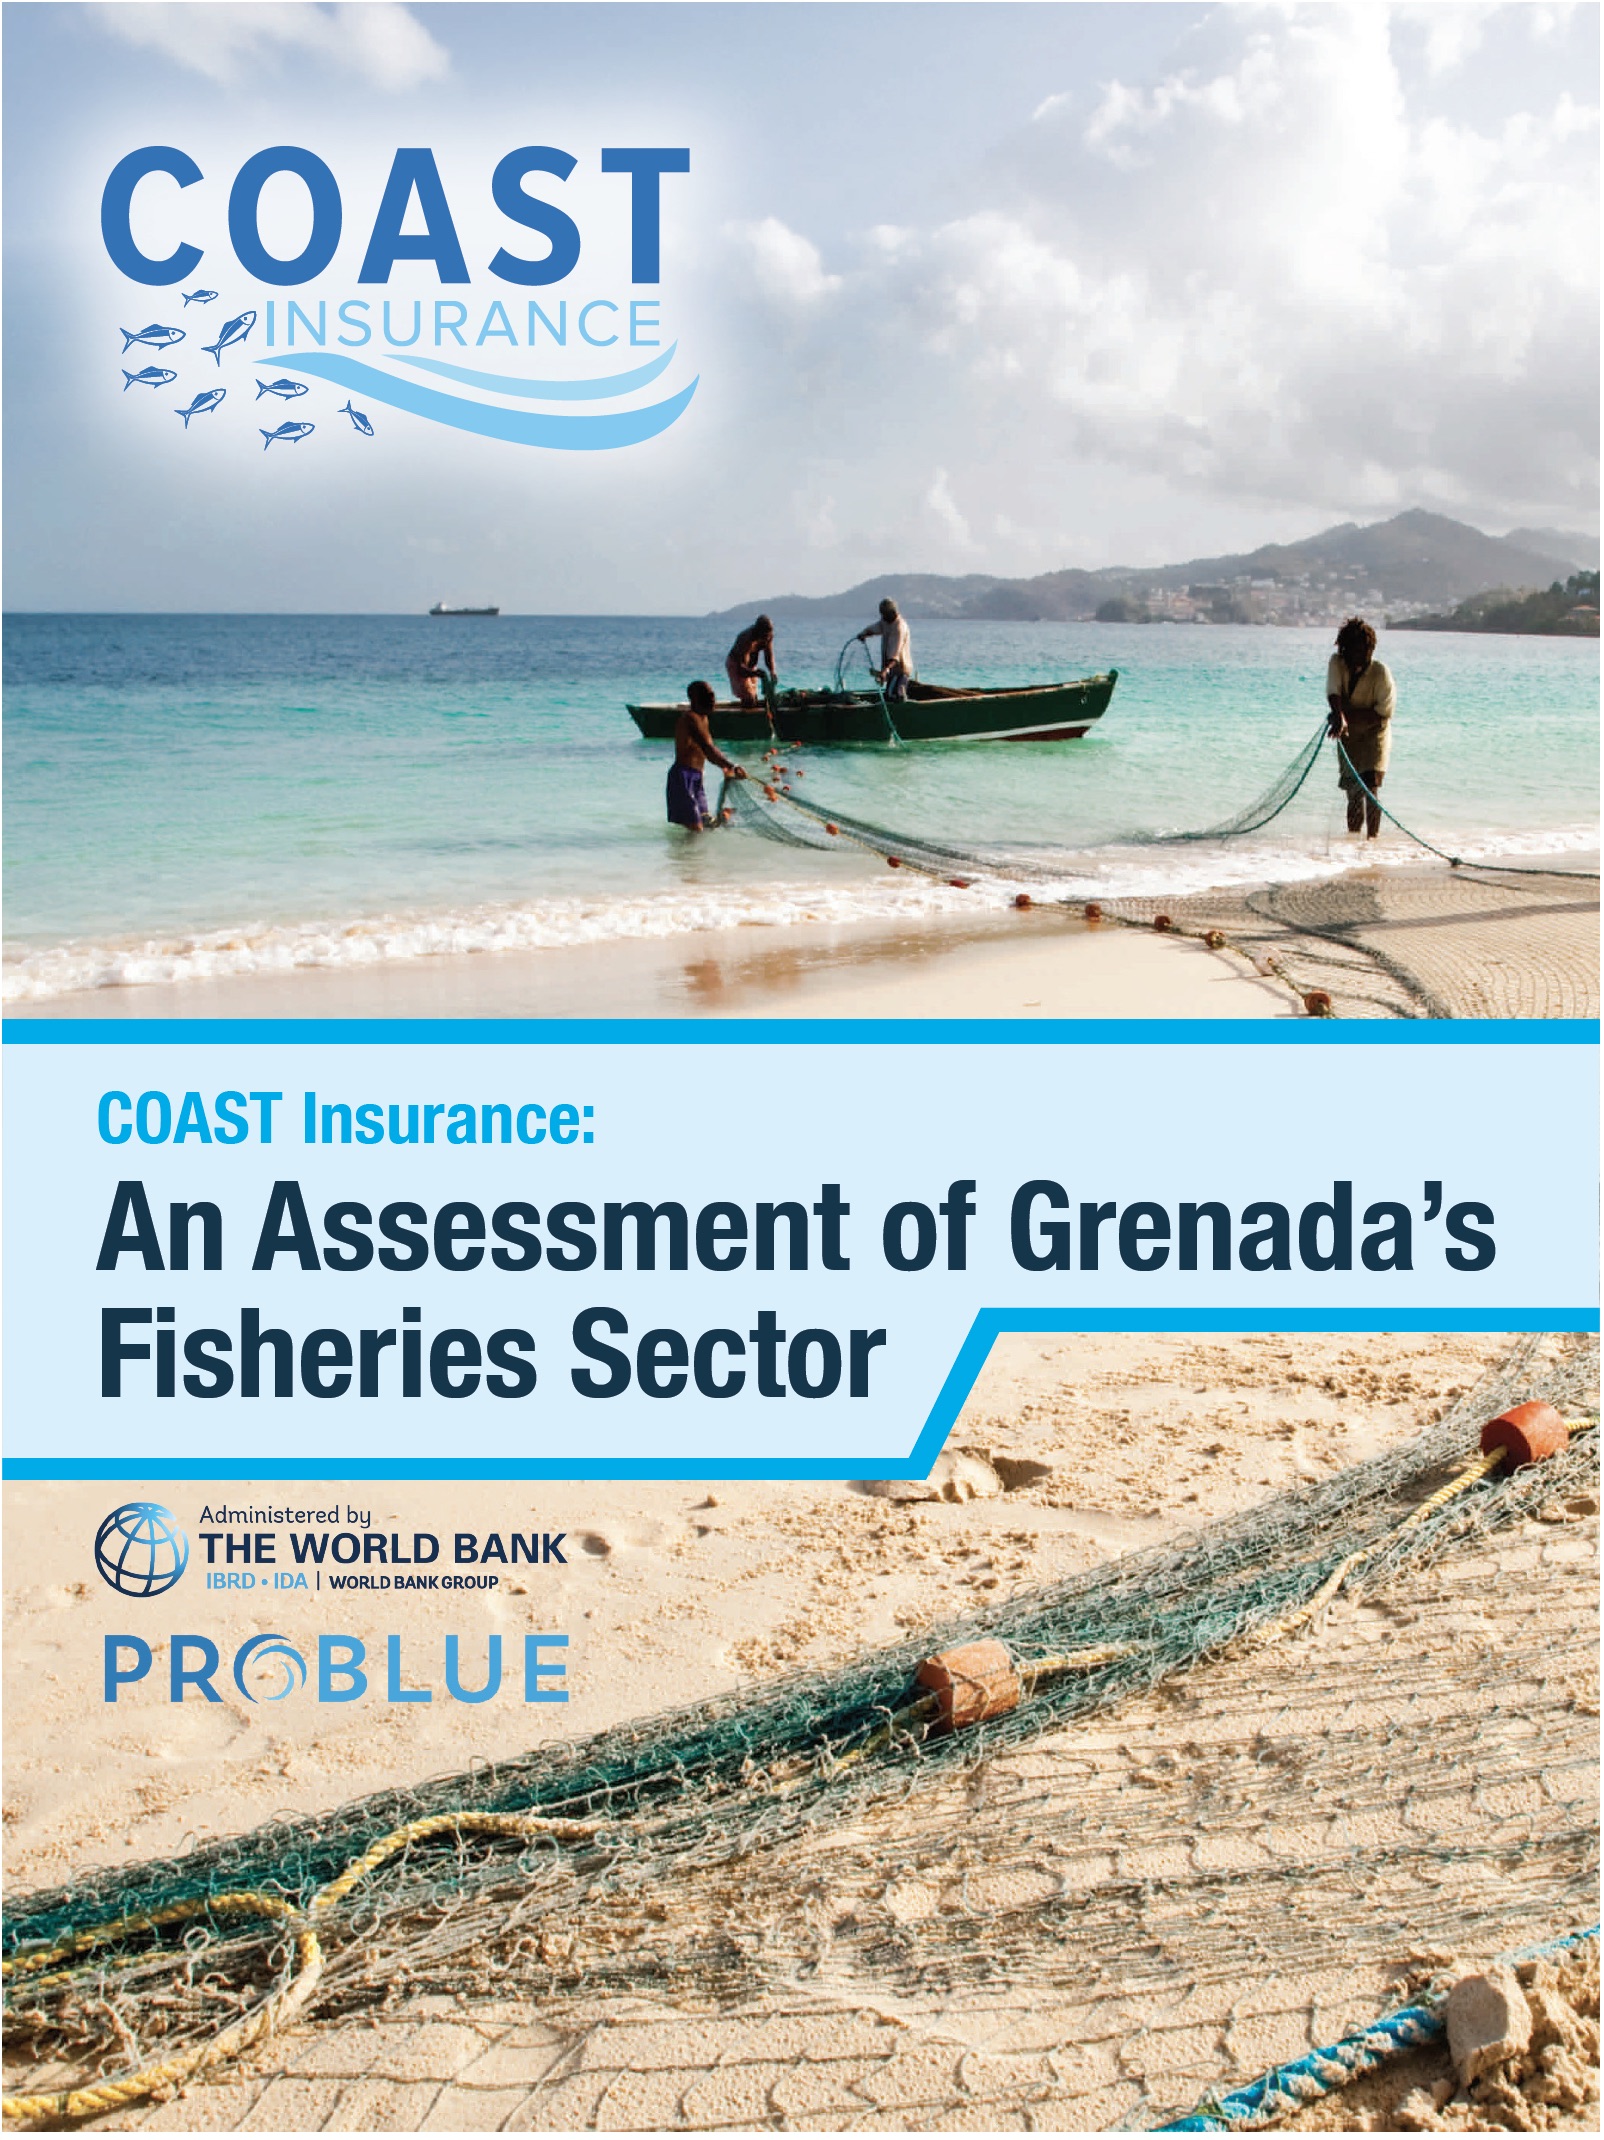 COAST Insurance: An Assessment of Grenada's Fisheries Sector